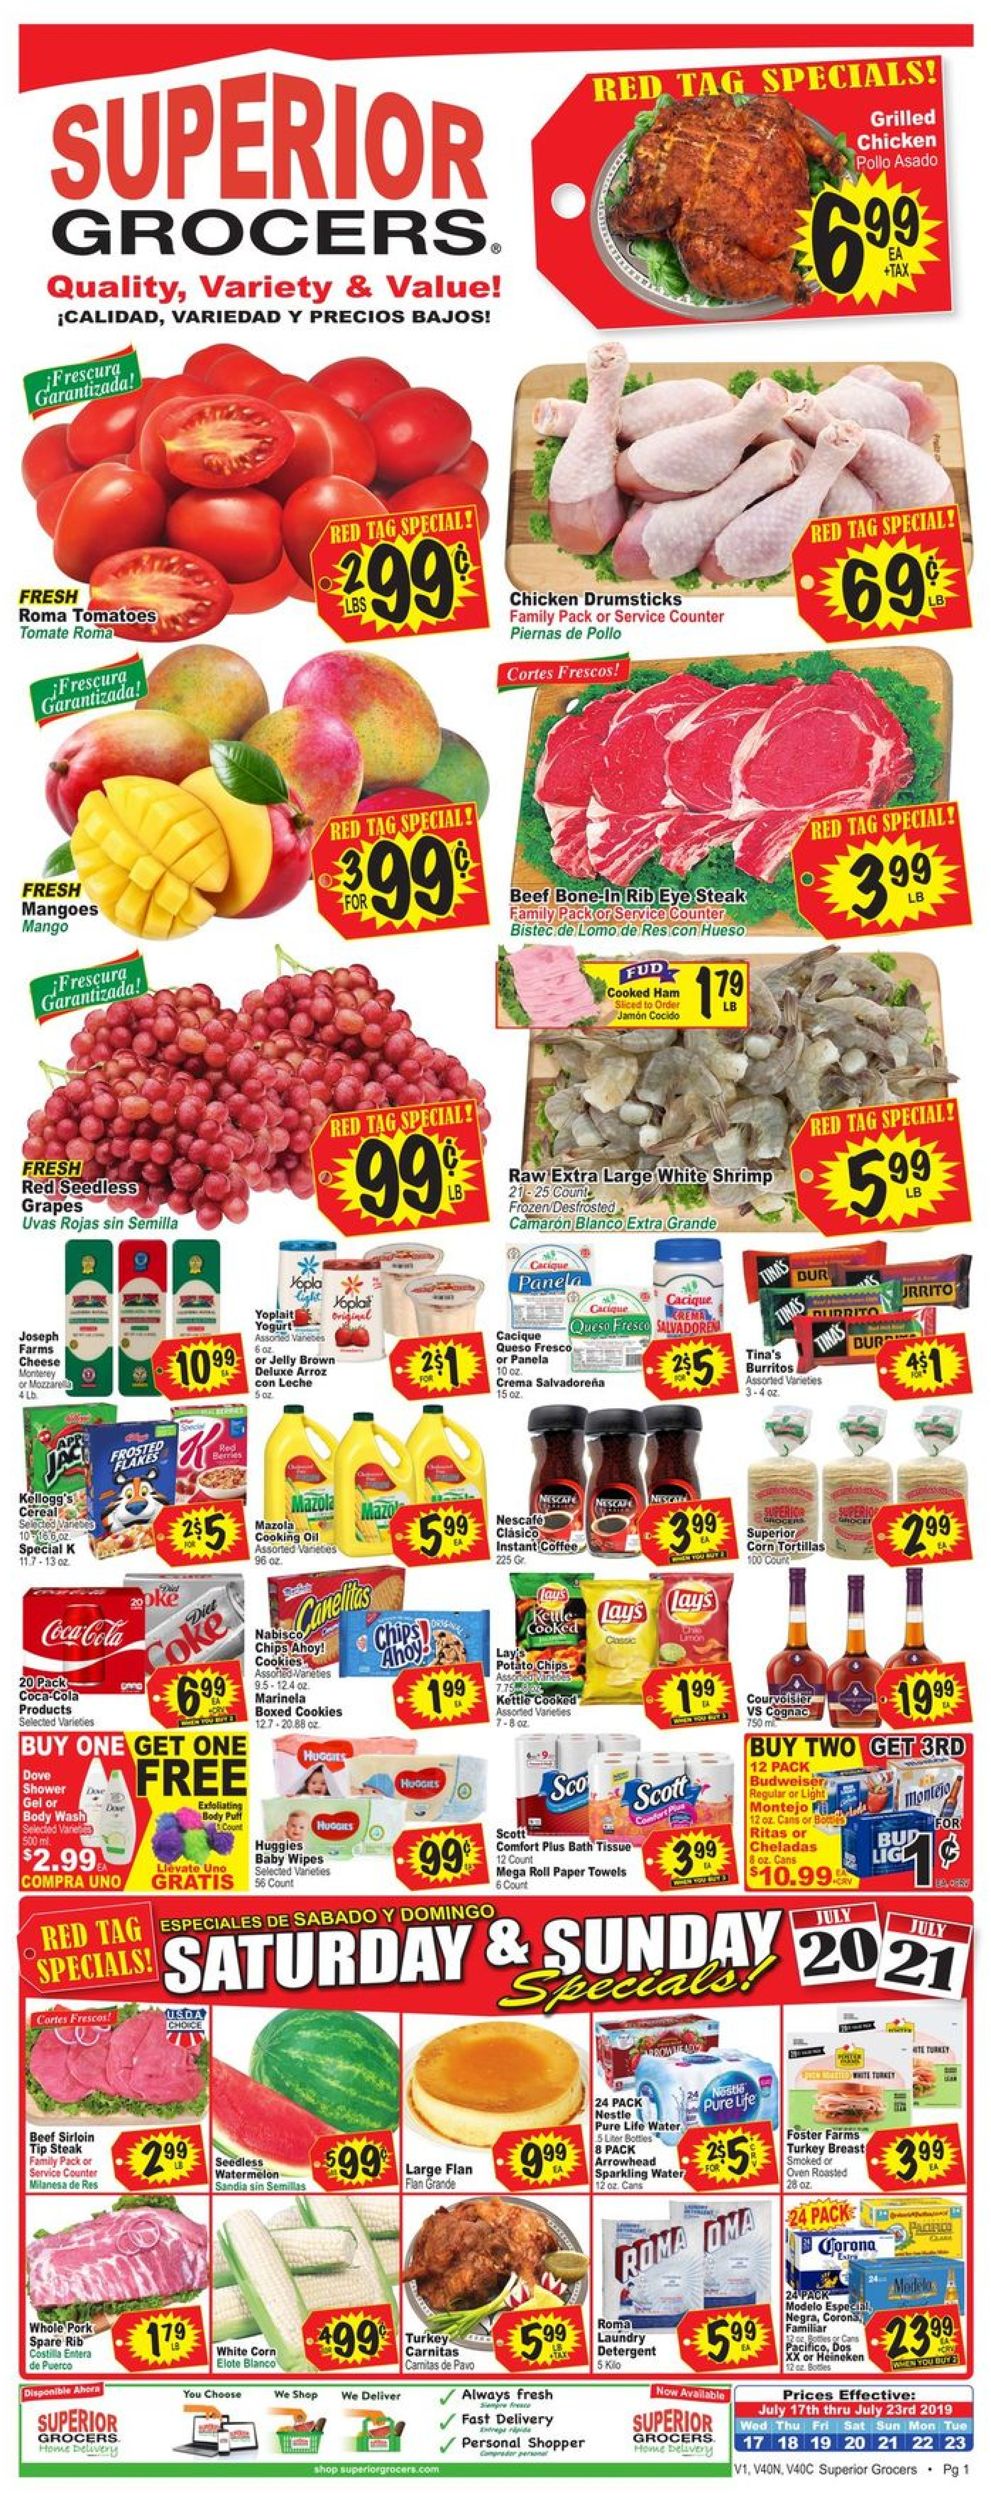 Superior Grocers Current weekly ad 07/17 - 07/23/2019 - frequent-ads.com